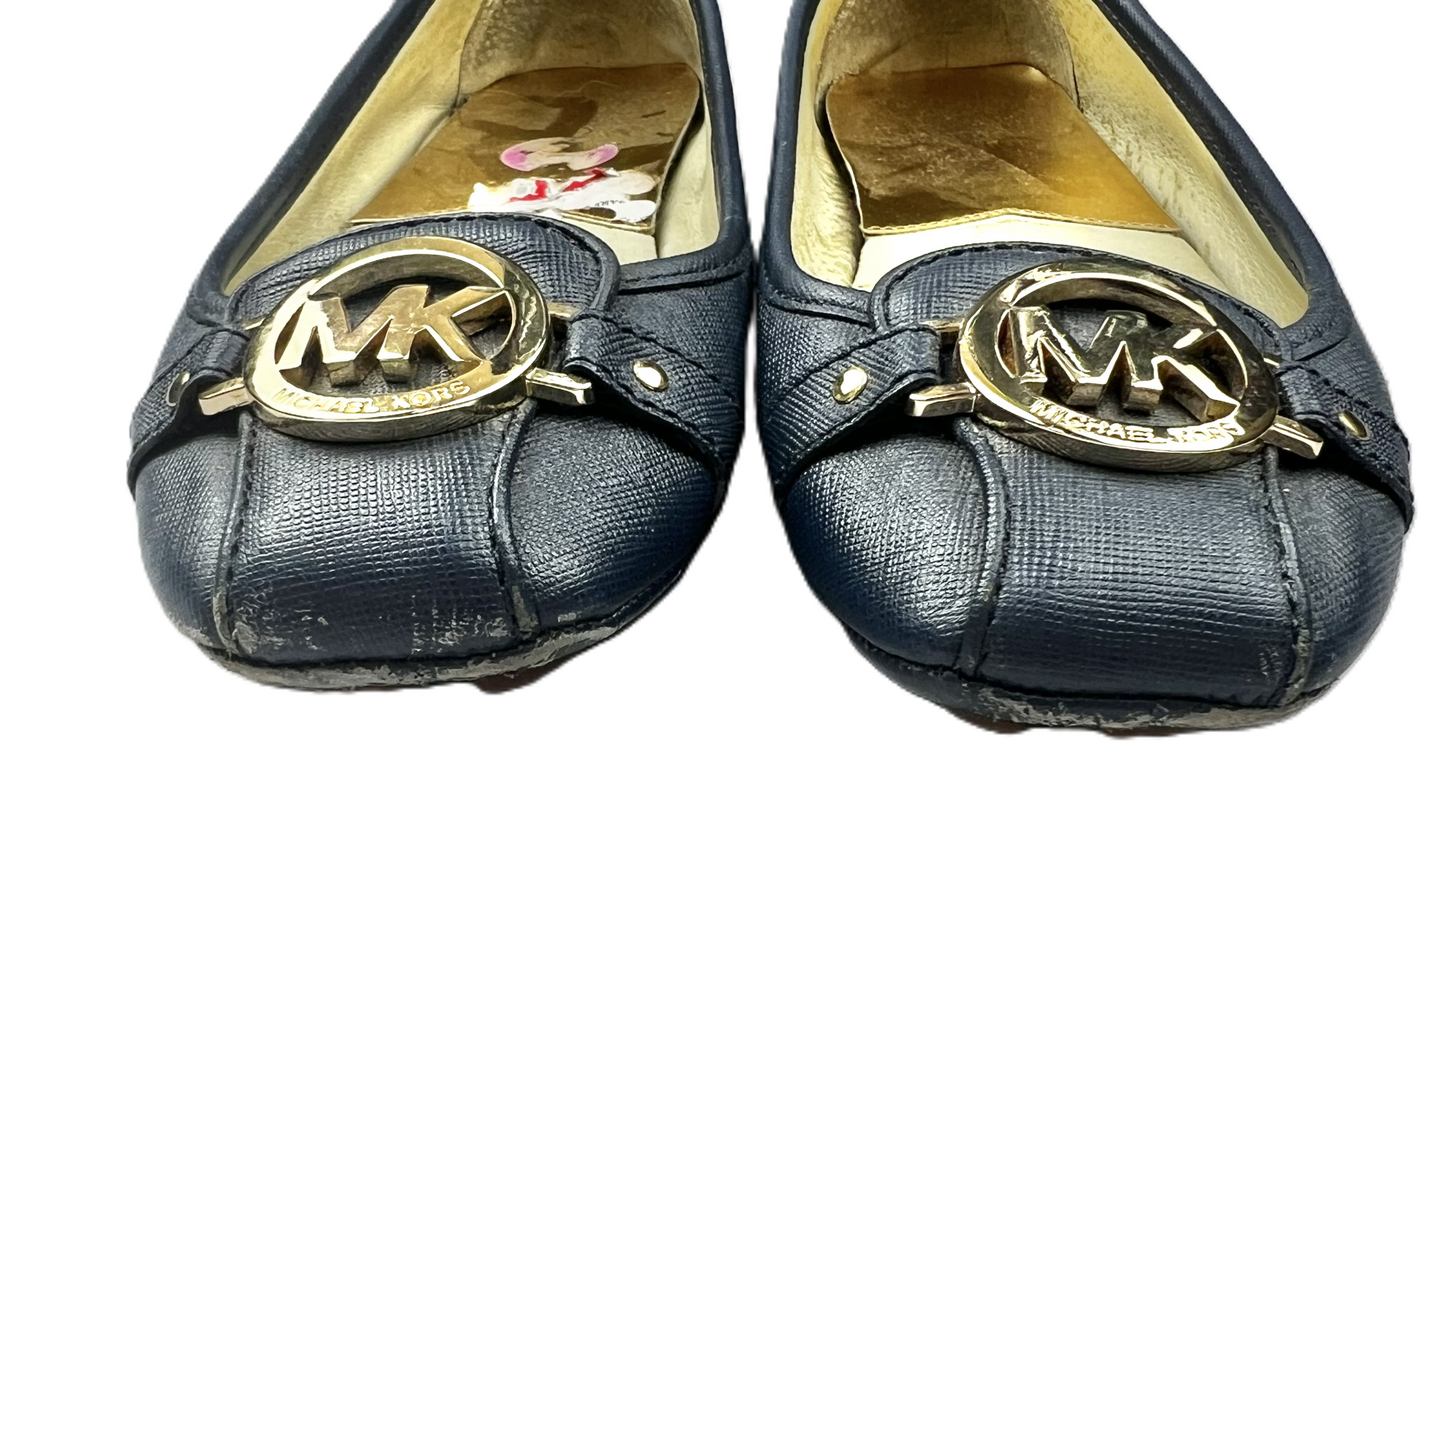 Blue & Gold Shoes Flats By Michael By Michael Kors, Size: 8.5